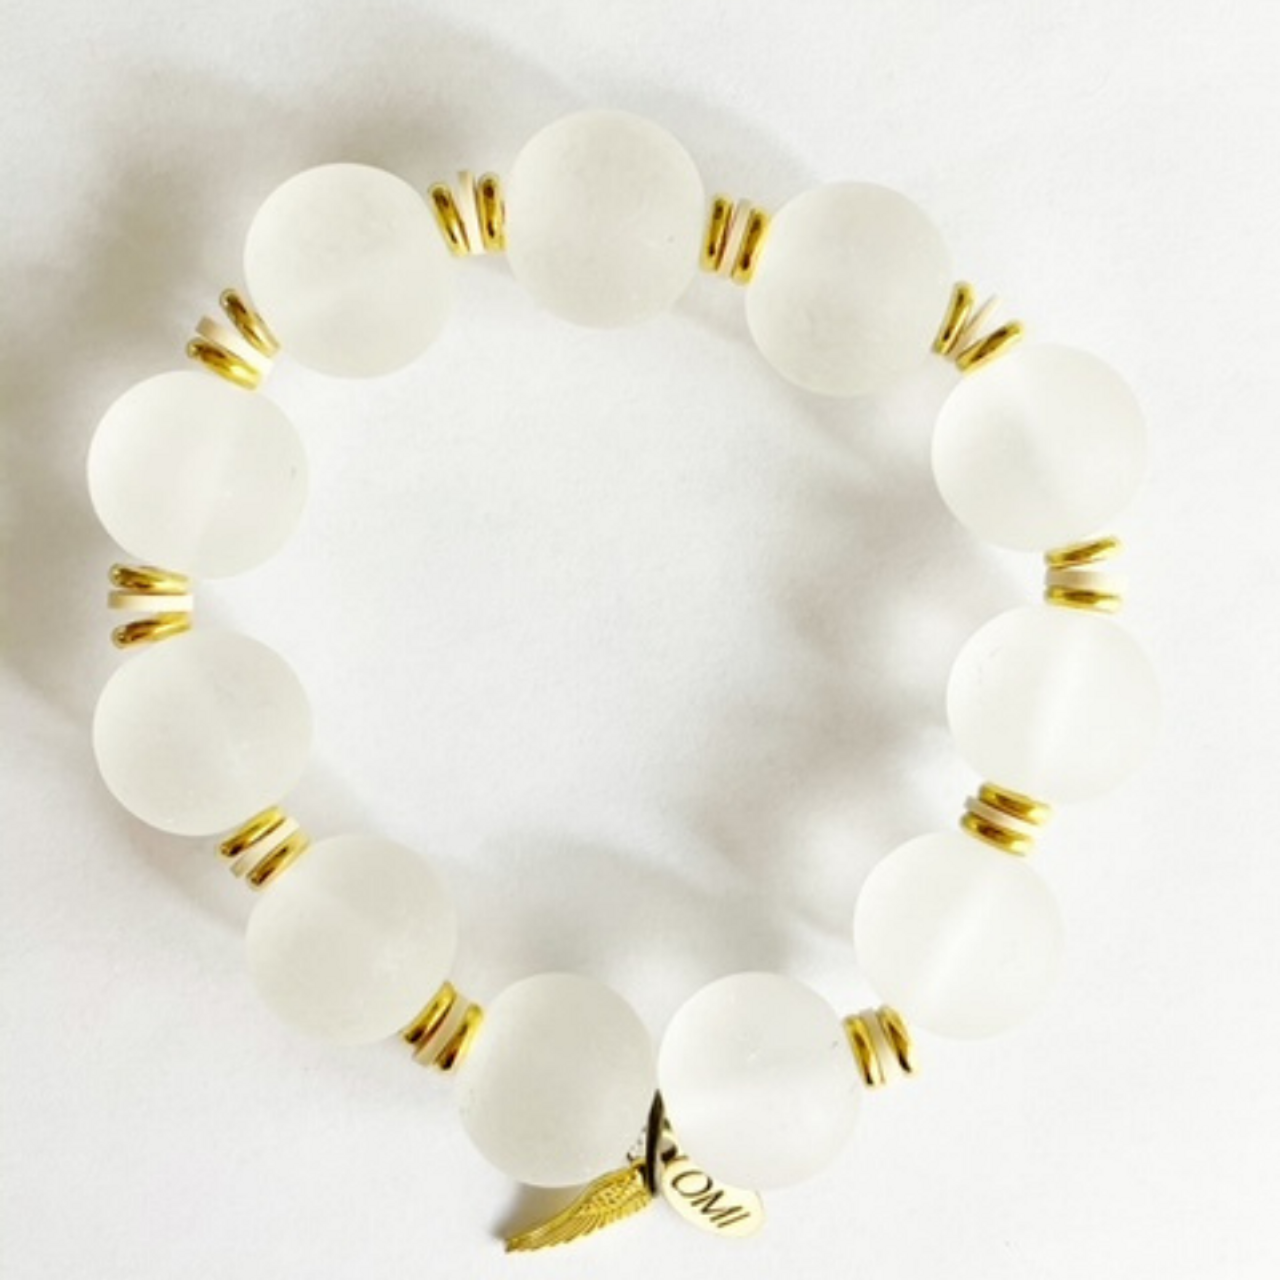 White Wood Big Bead Bracelet with Gold Geometric Bead and Spacers 20mm